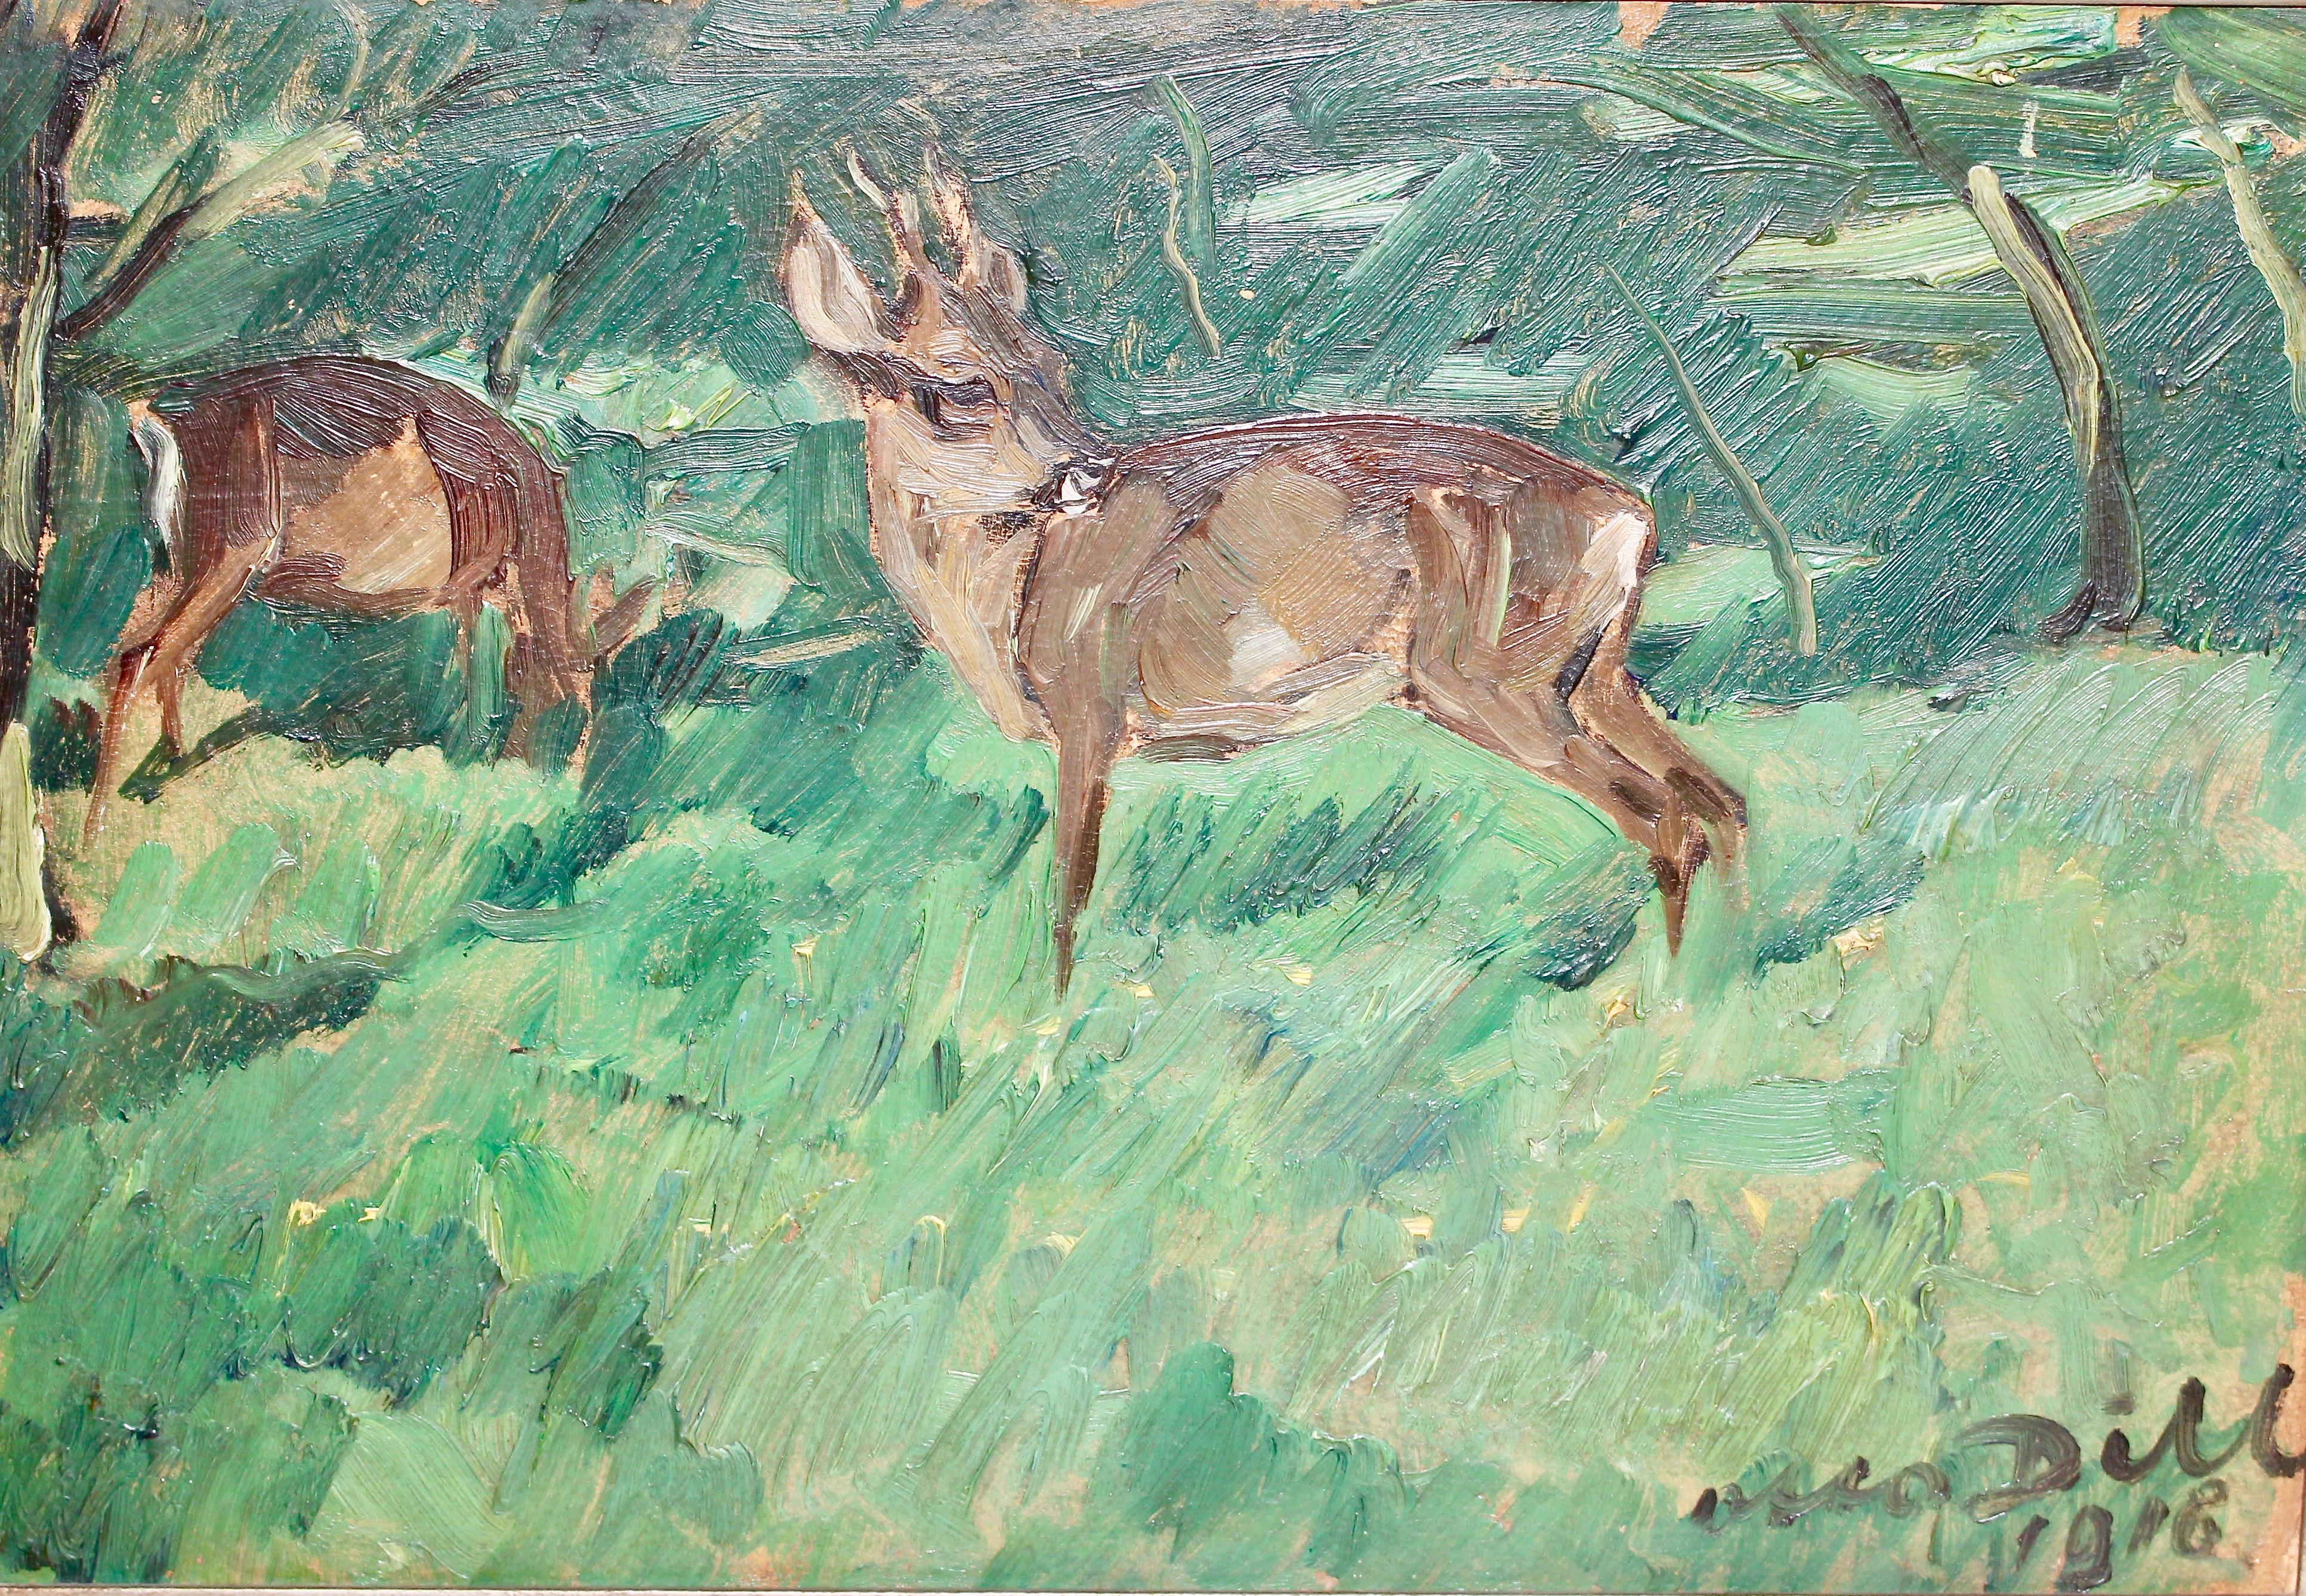 Otto Dill, "Deer", 1918, oil painting, two grazing fawns.